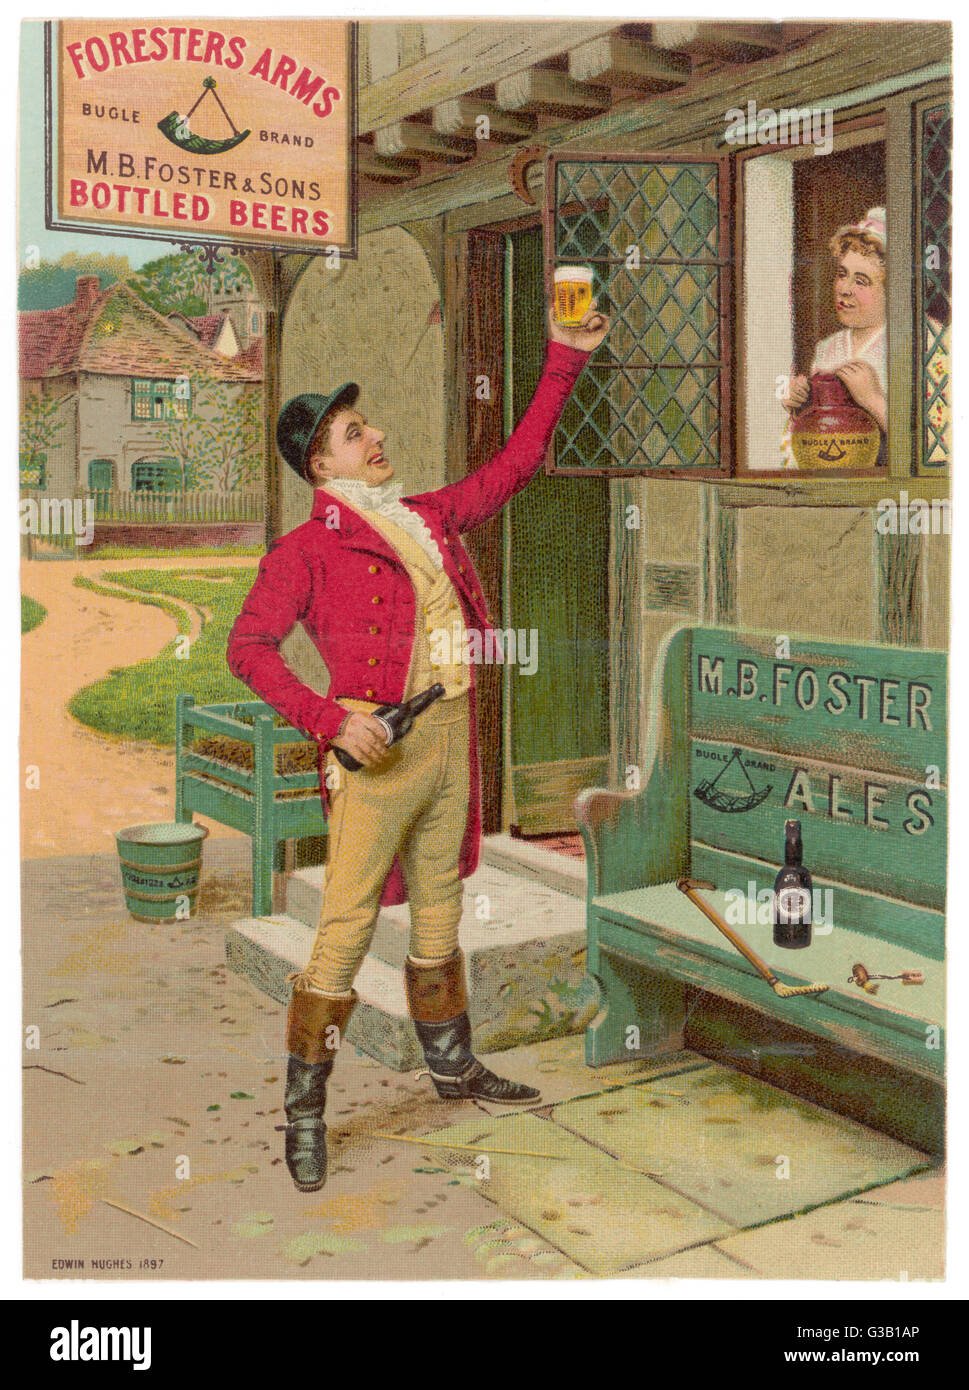 M B FOSTER'S ALES  Bottled beers        Date: circa 1890s Stock Photo